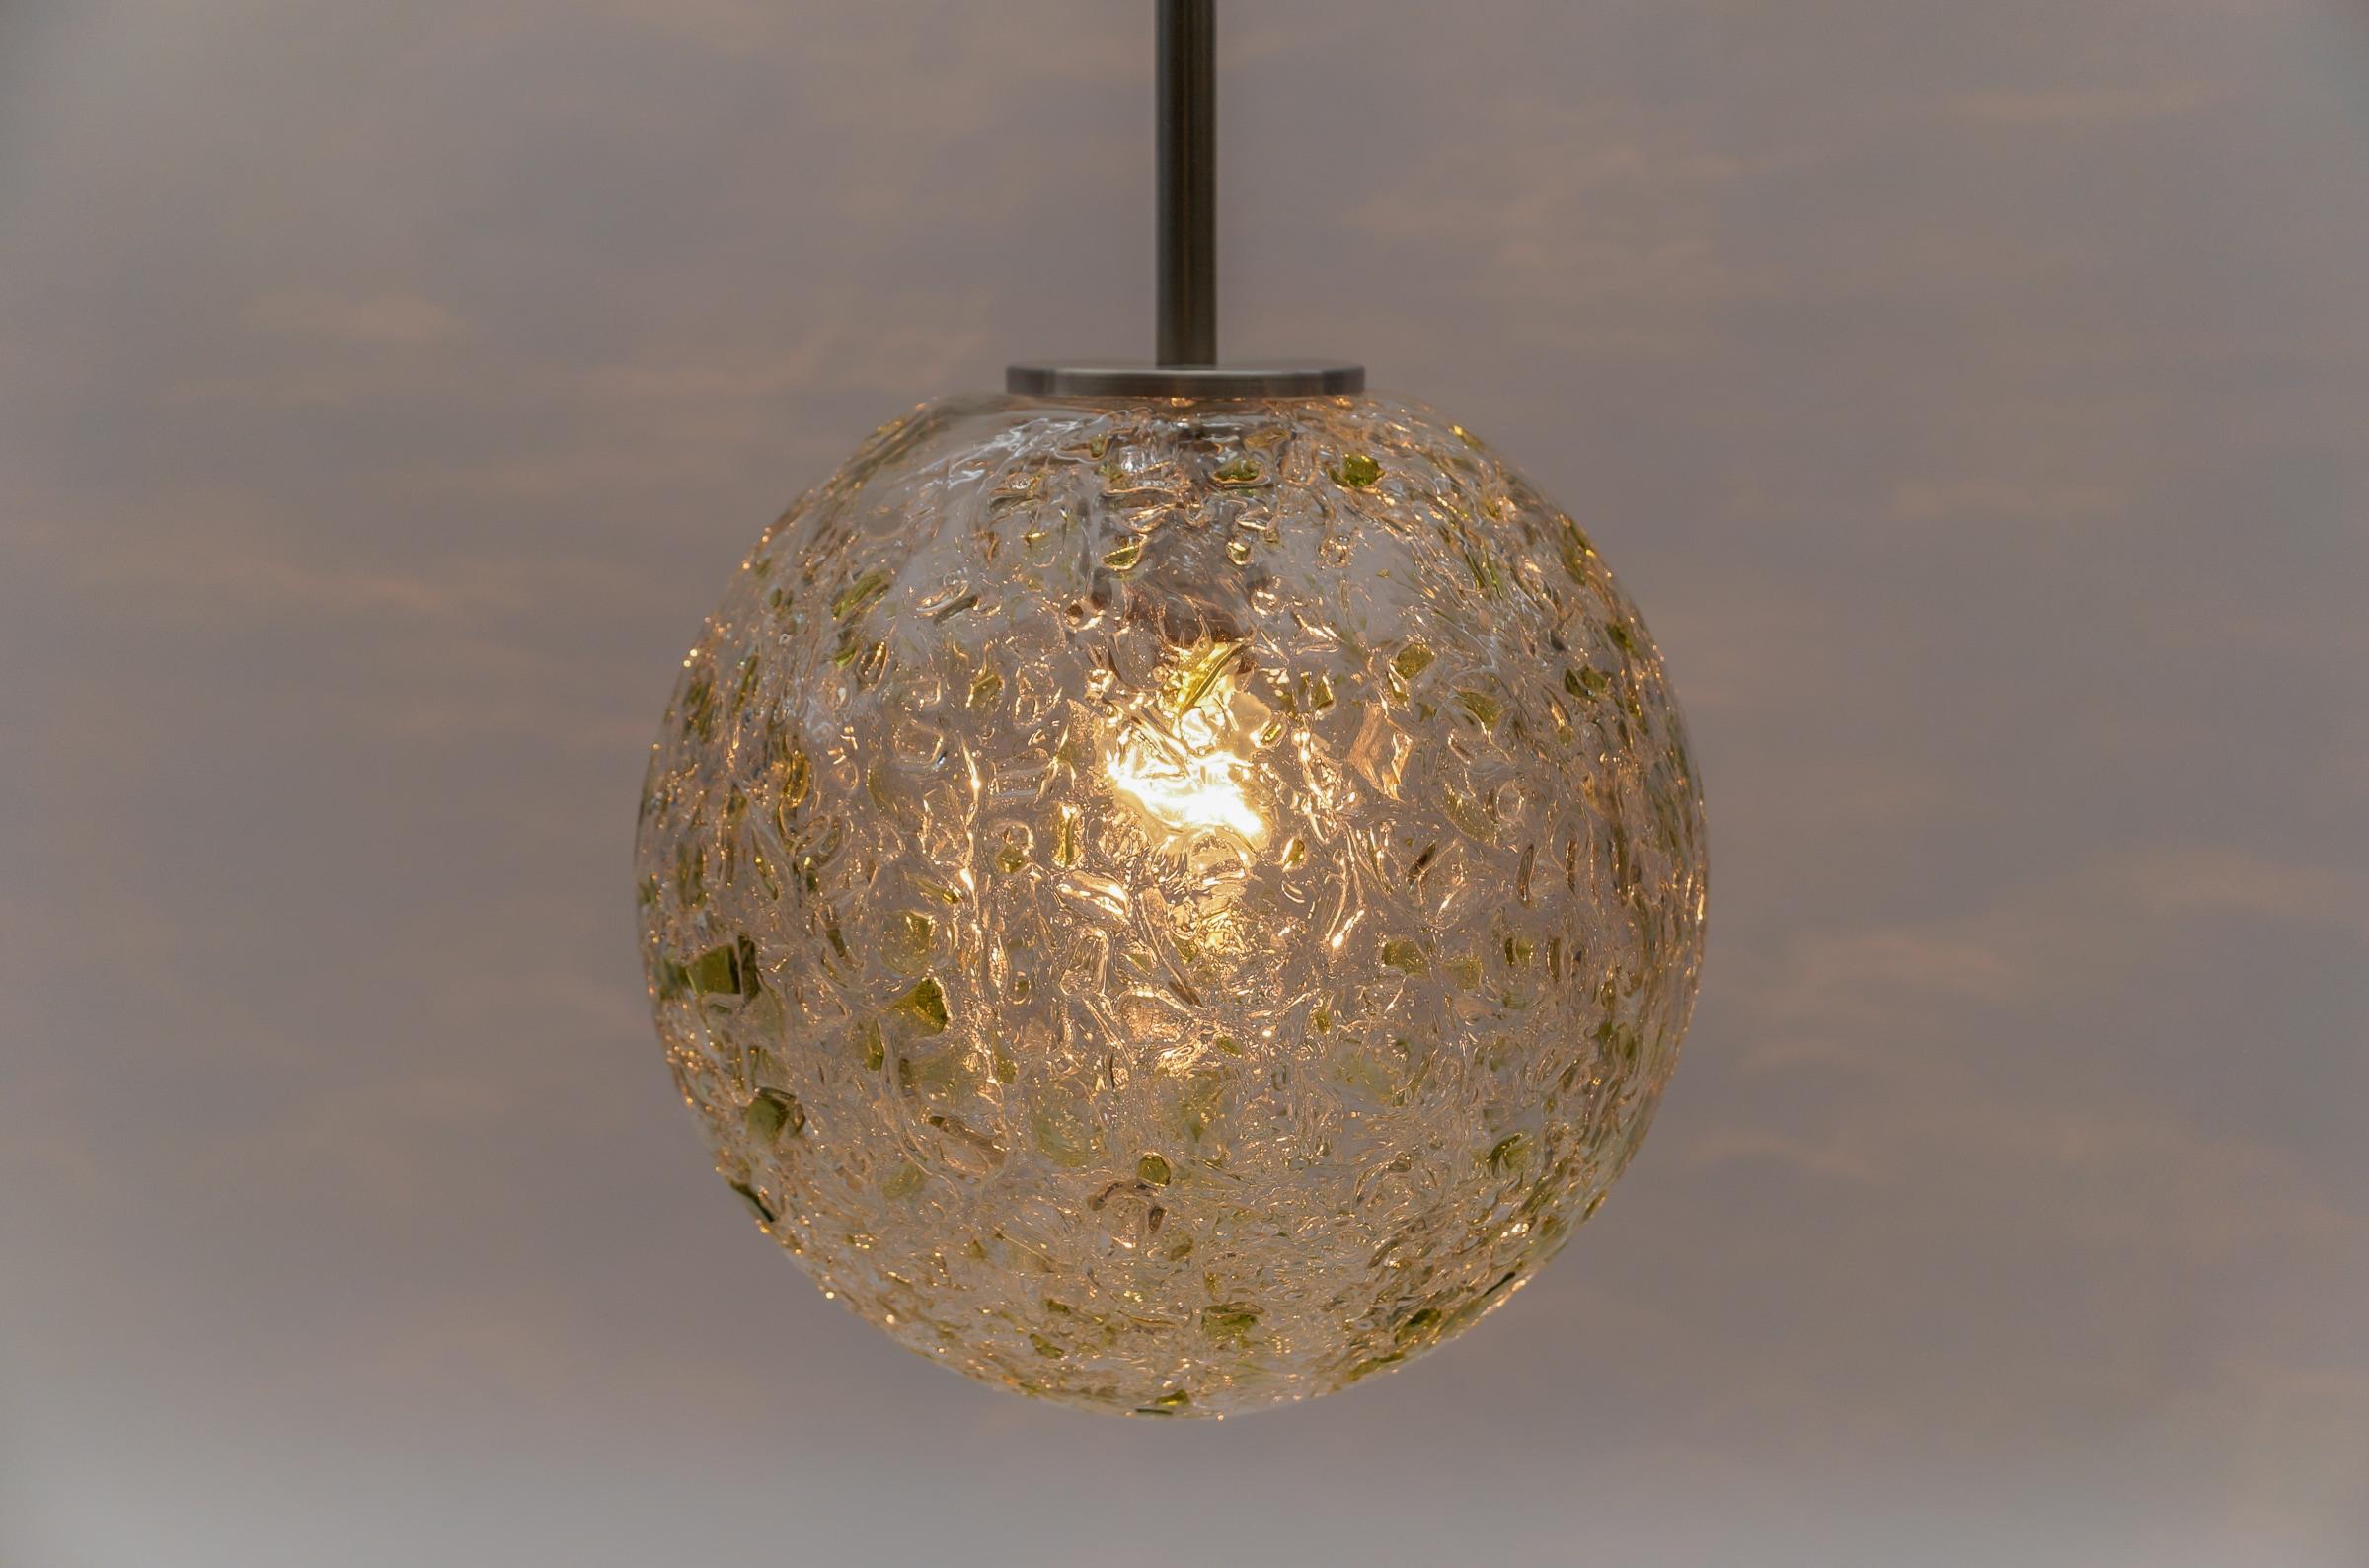 Green Massive Glass Ball Pendant Lamp by Doria, 1960s Germany For Sale 1